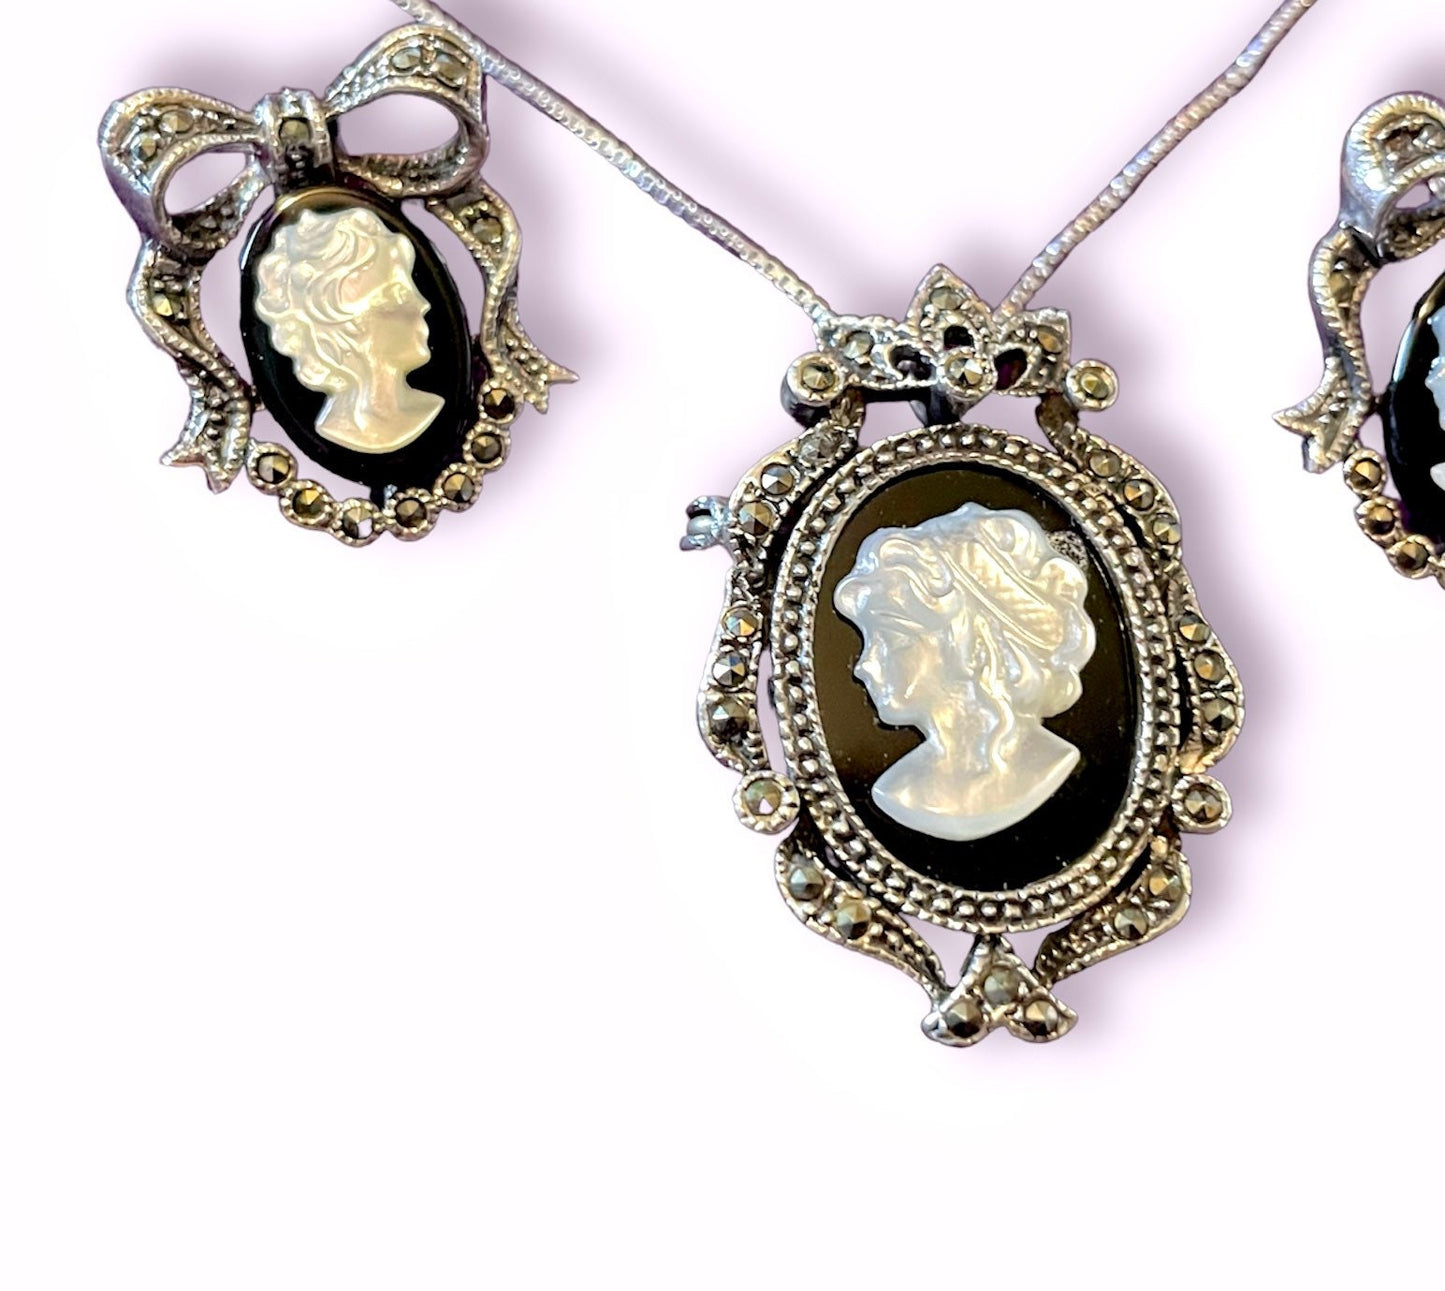 Sterling Silver, Marcasite, Onyx & Mother of Pearl Cameo Necklace, Brooch and Earring Set